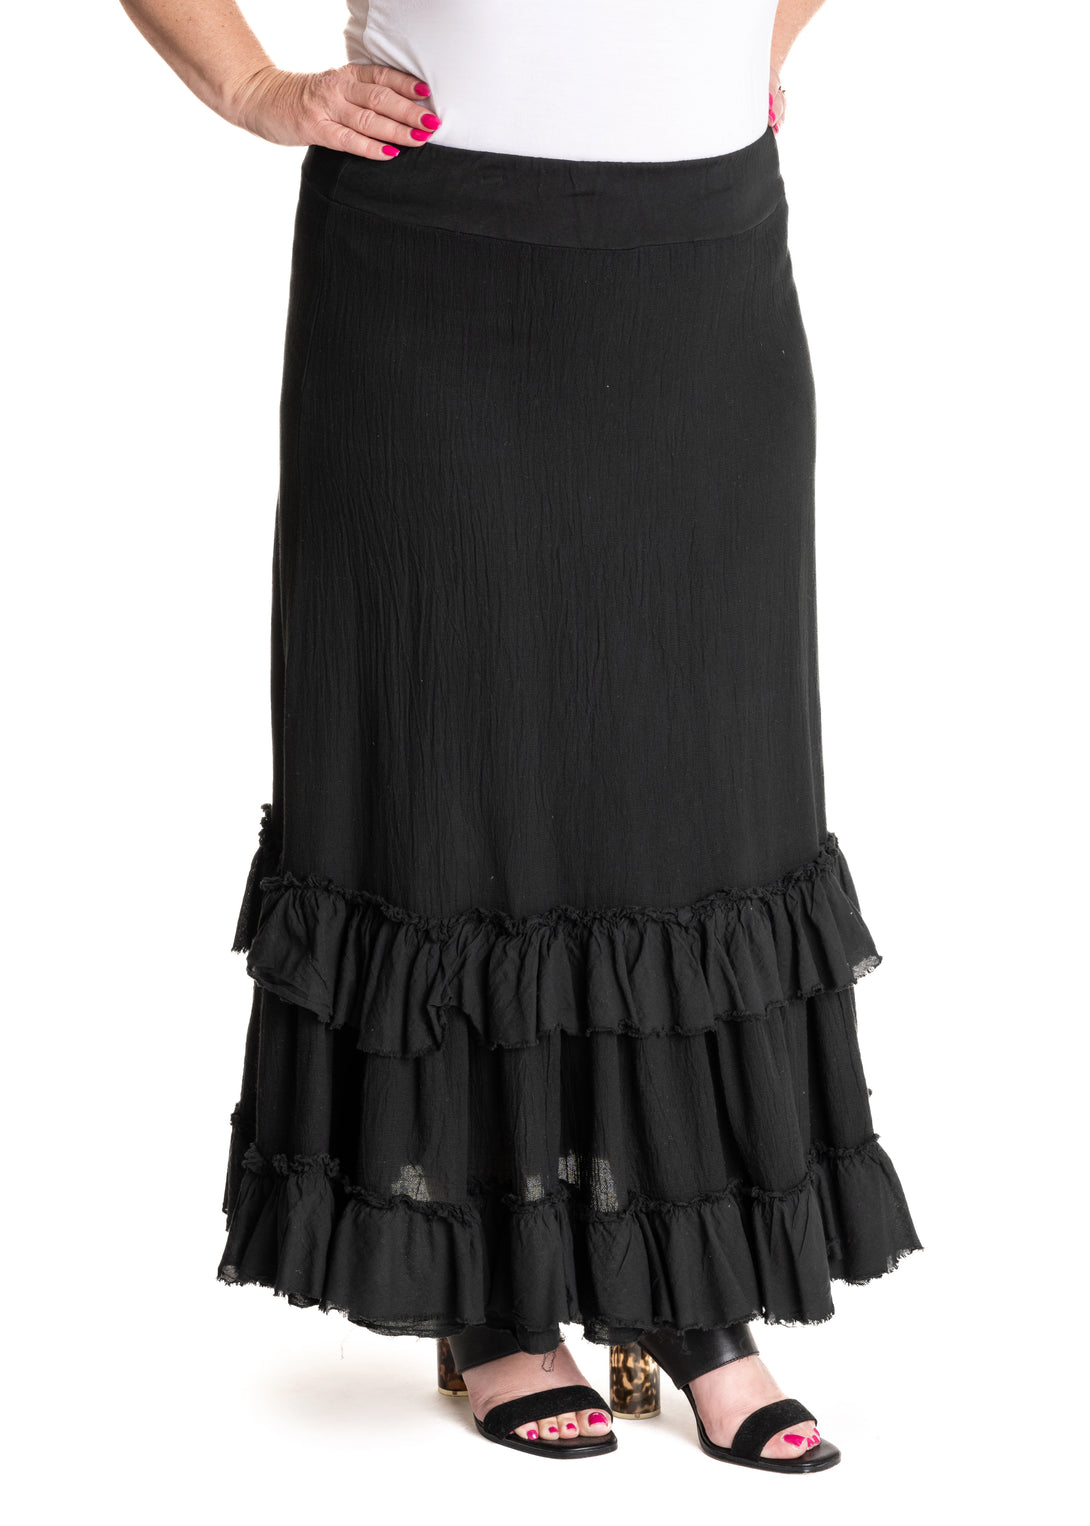 Rylee Cotton Frill Skirt in Onyx - Imagine Fashion